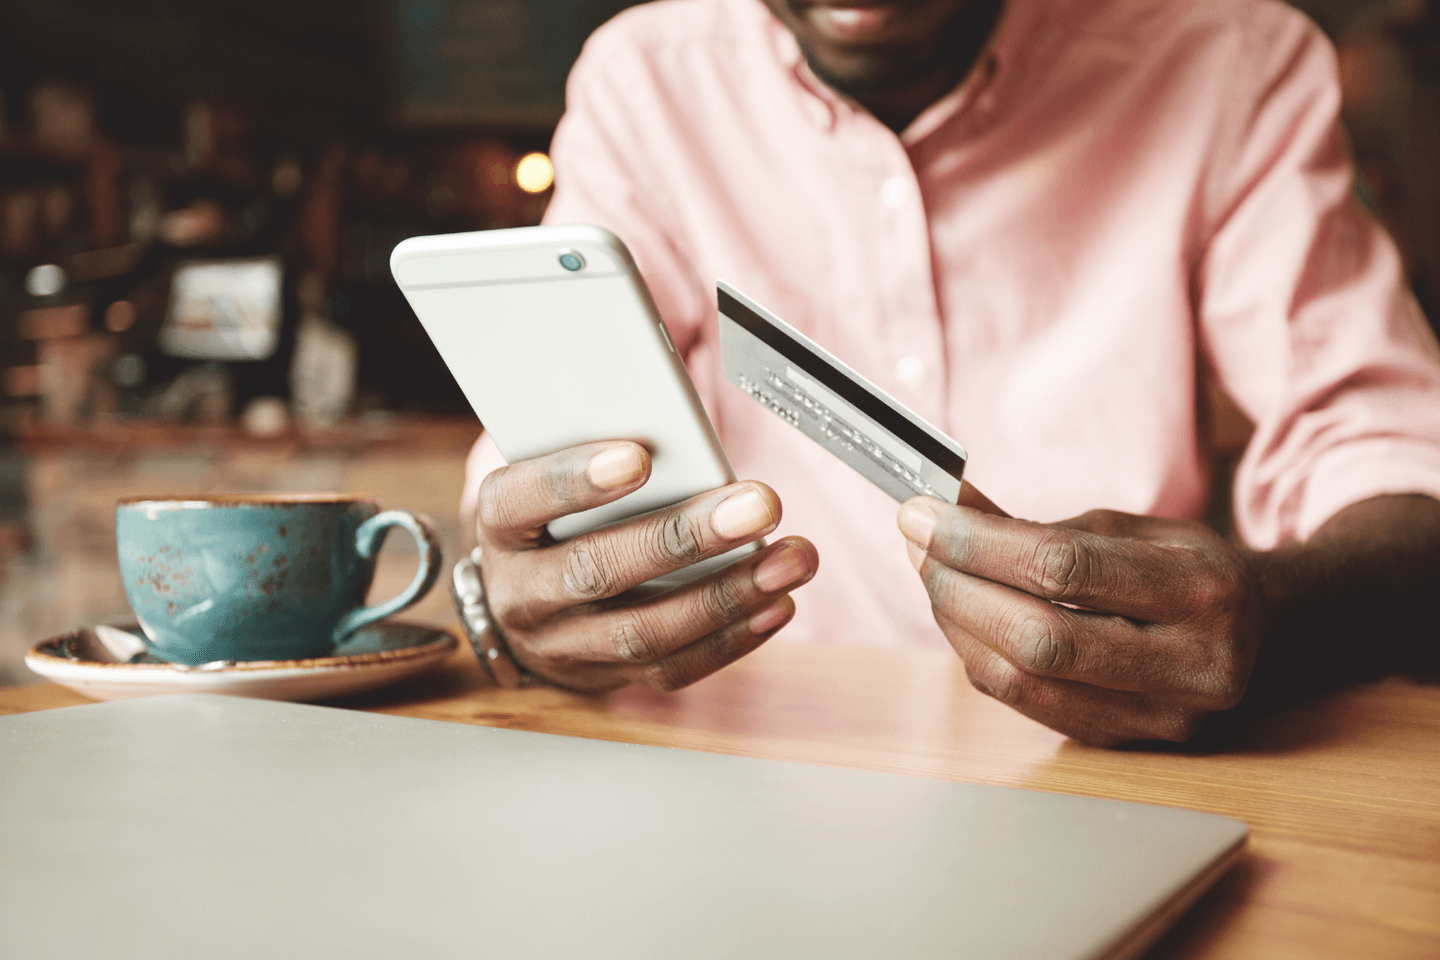 Man holds credit card while looking at his phone